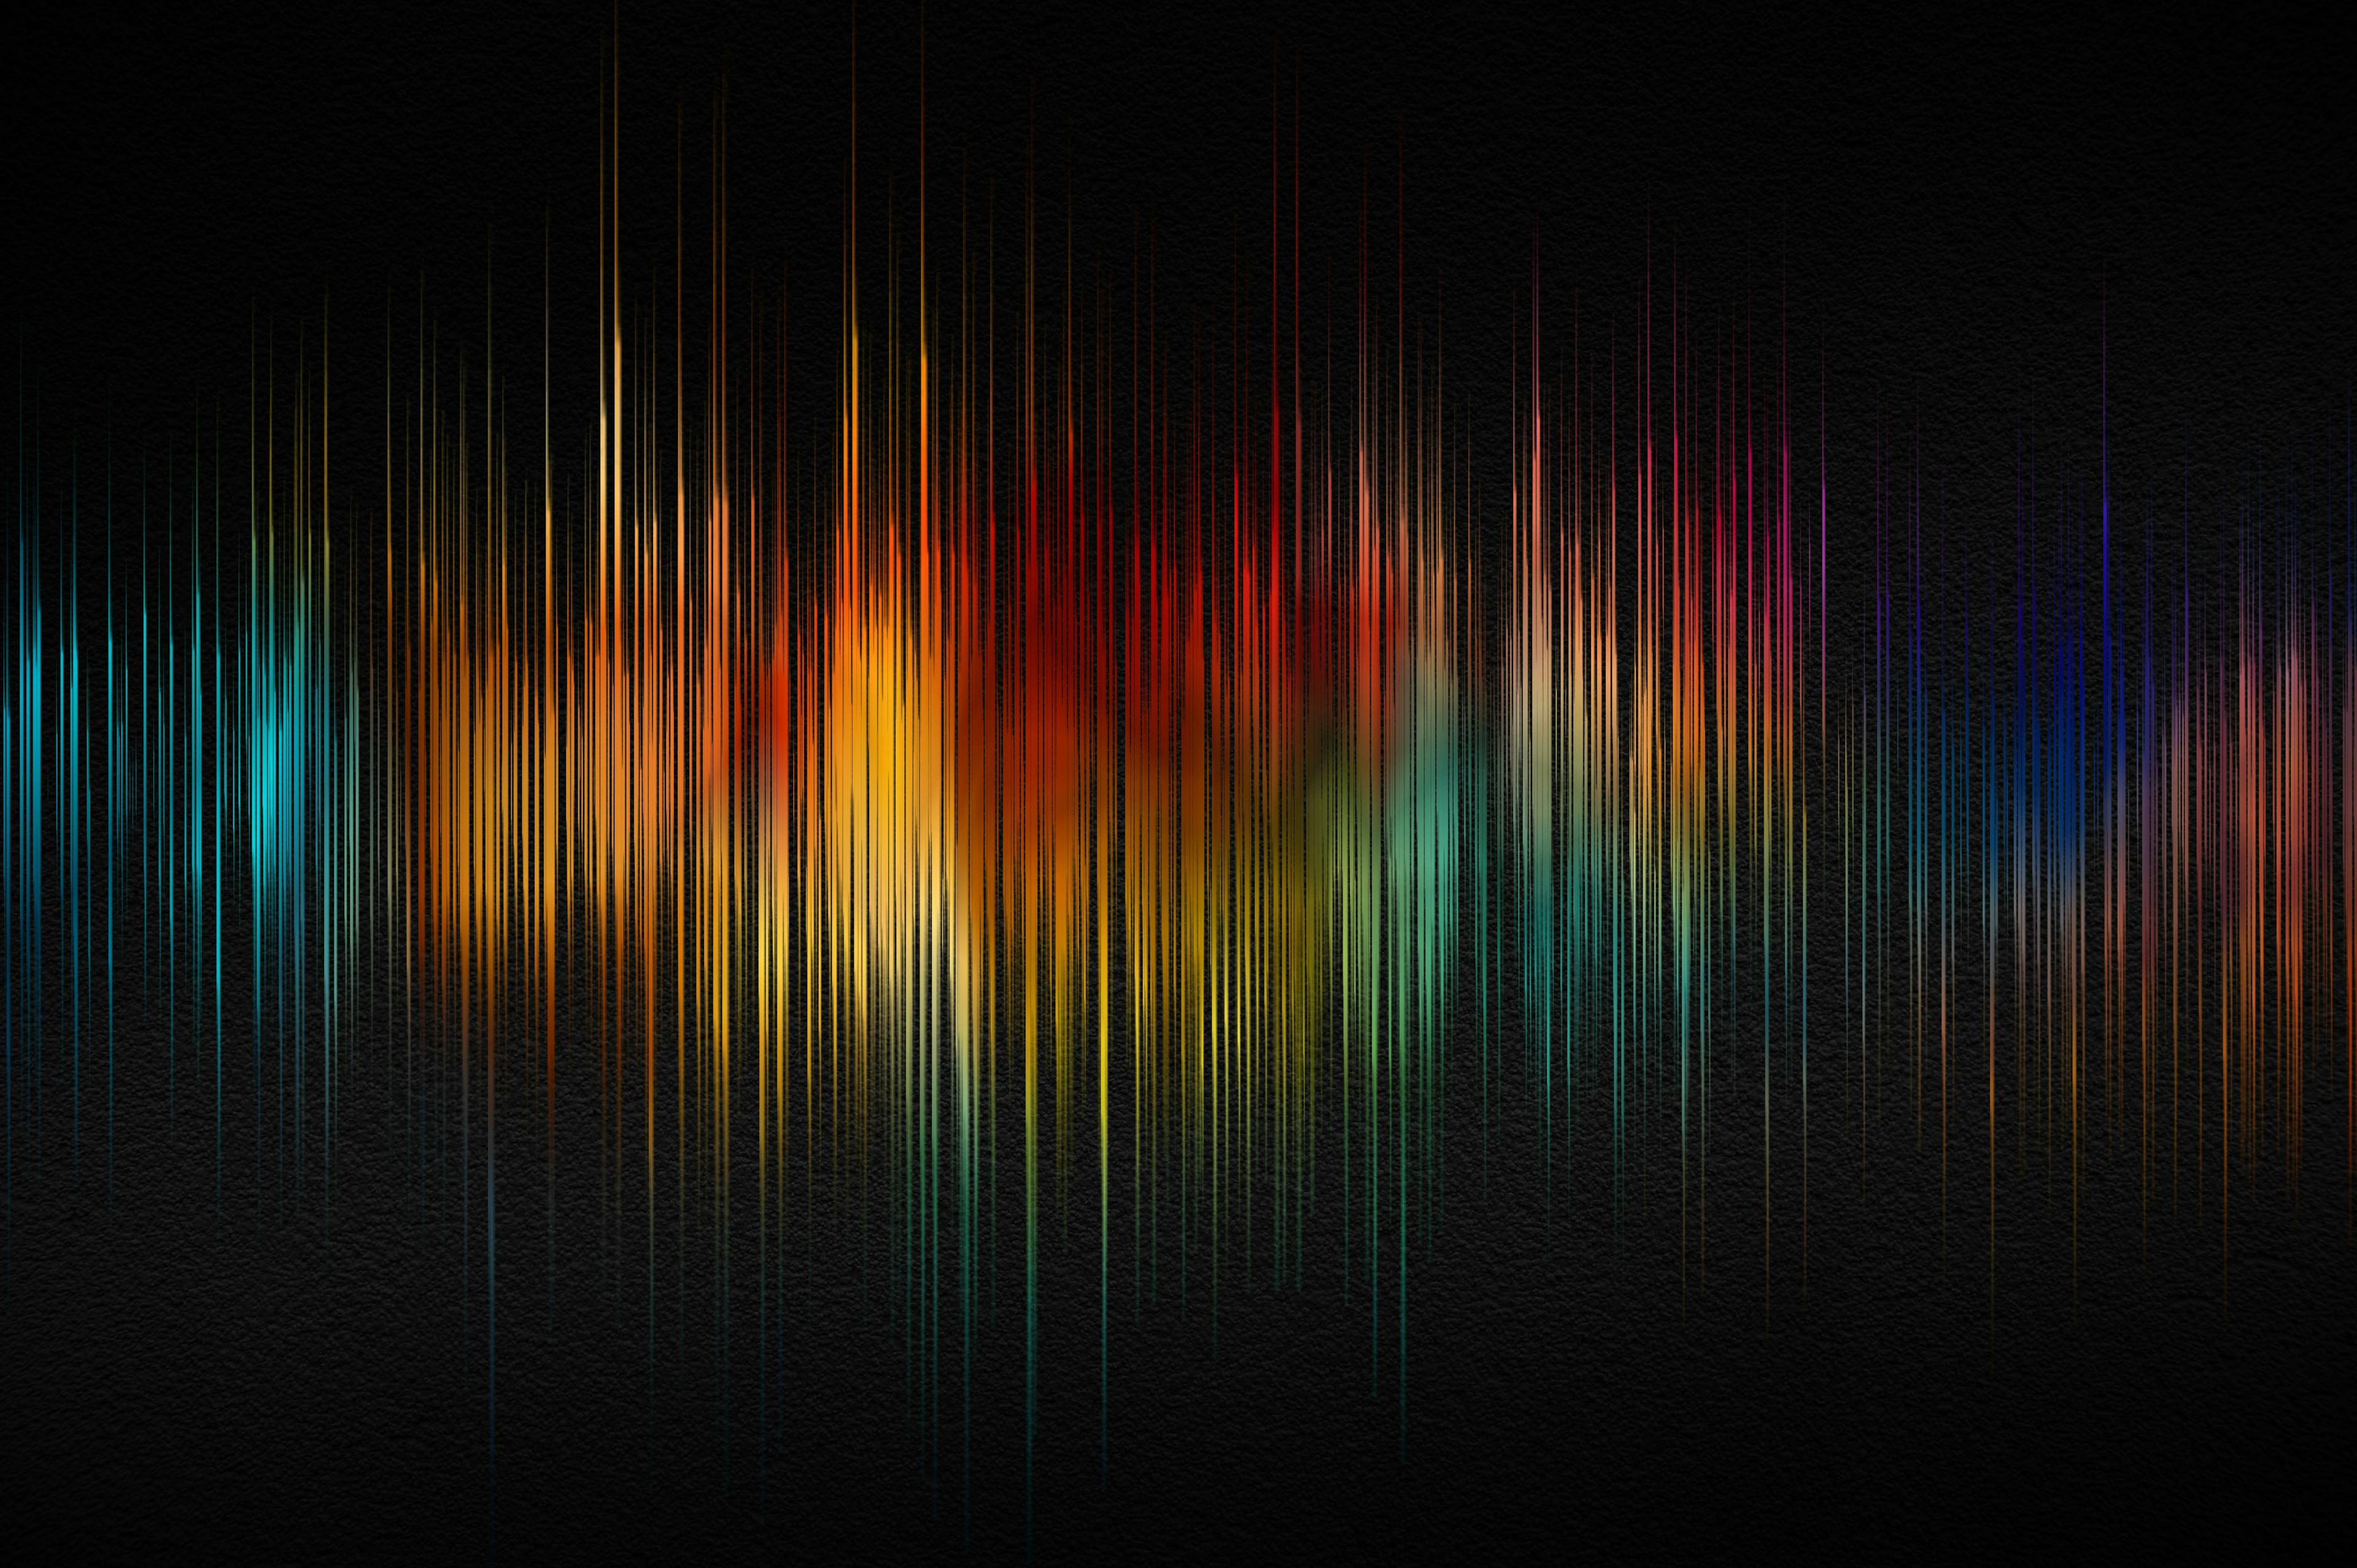 Sound wave with spectral colours. Abstract image of musical equalizer. Colorful equalizer | Image Credit: © andyborodaty - stock.adobe.com